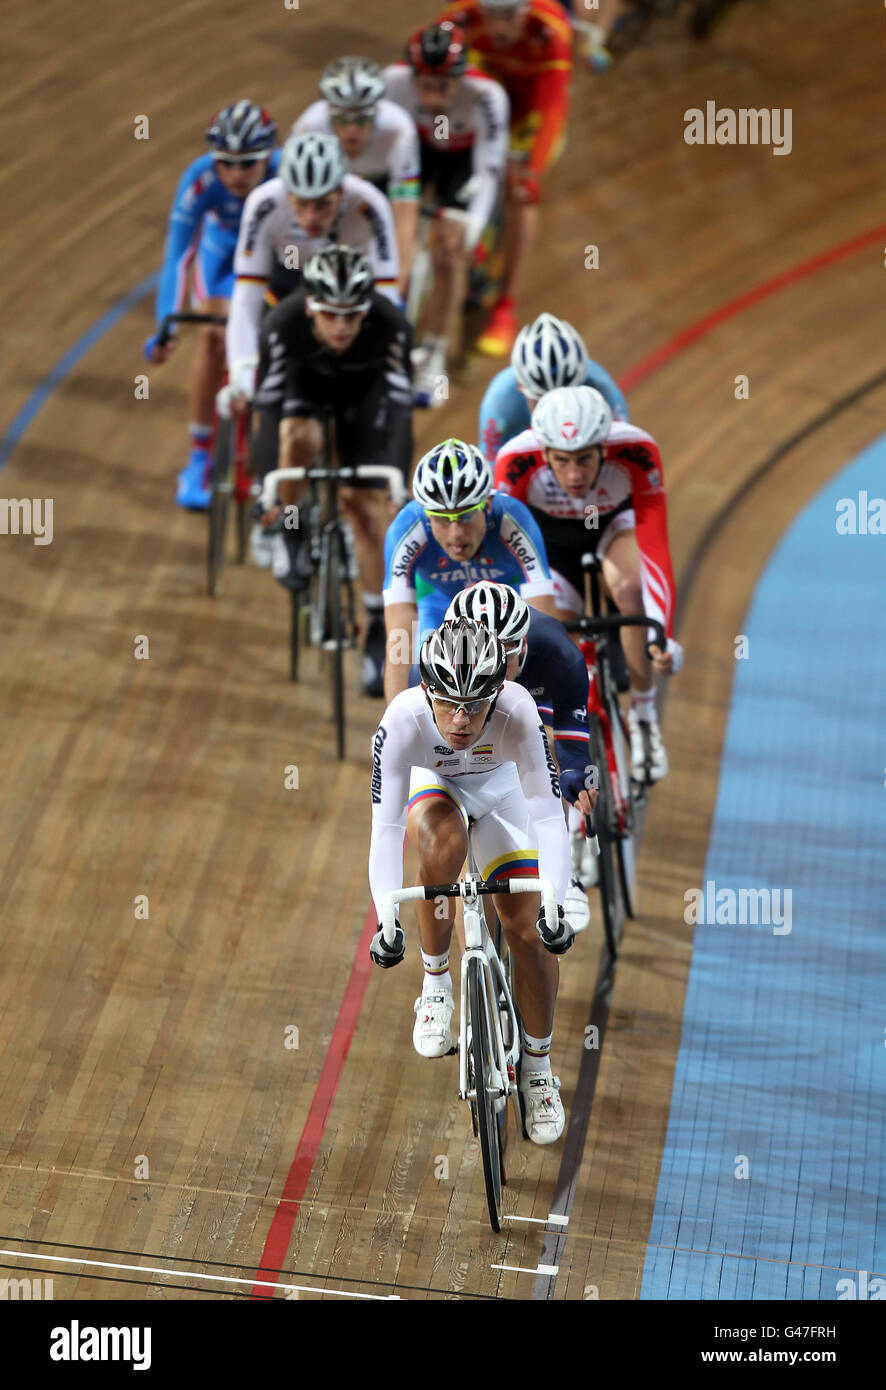 Carlos Alberto Uran Arroyave leads the Men's Madison during day five of the UCI Track Cycling World Championships at Omnisport, Apeldoorn, Holland. Stock Photo